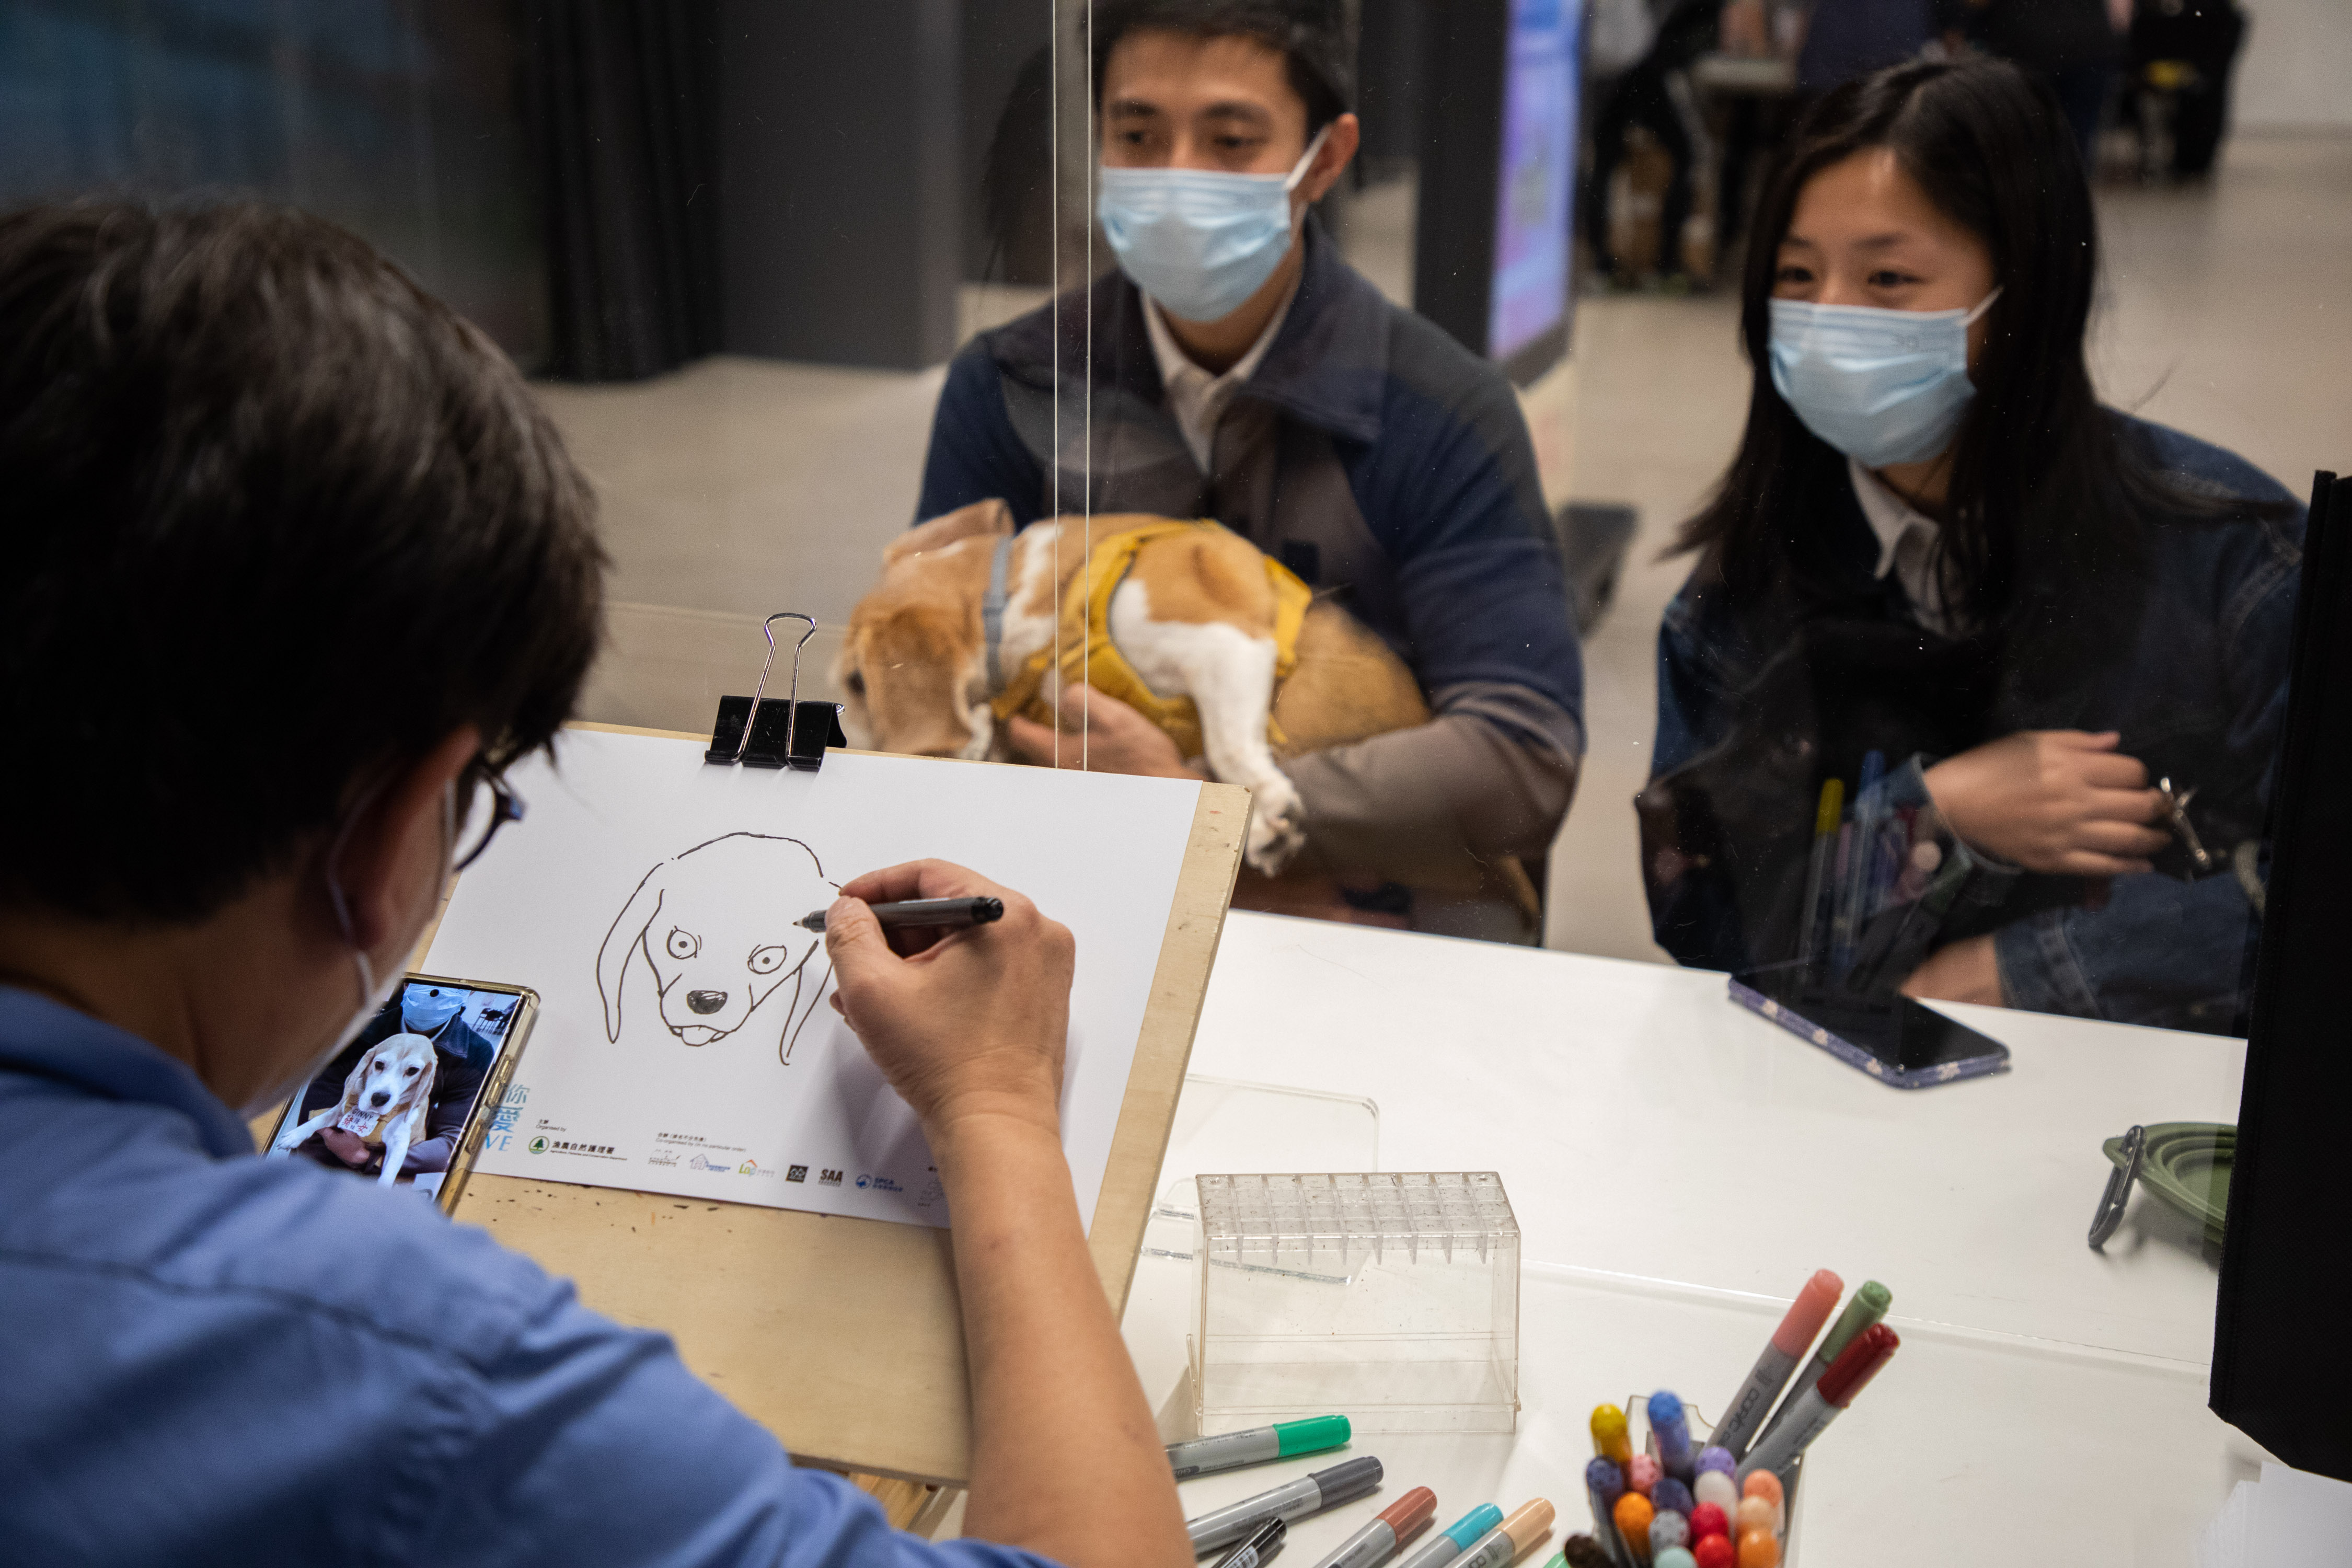 A speed sketcher provided free sketching service for visitors.